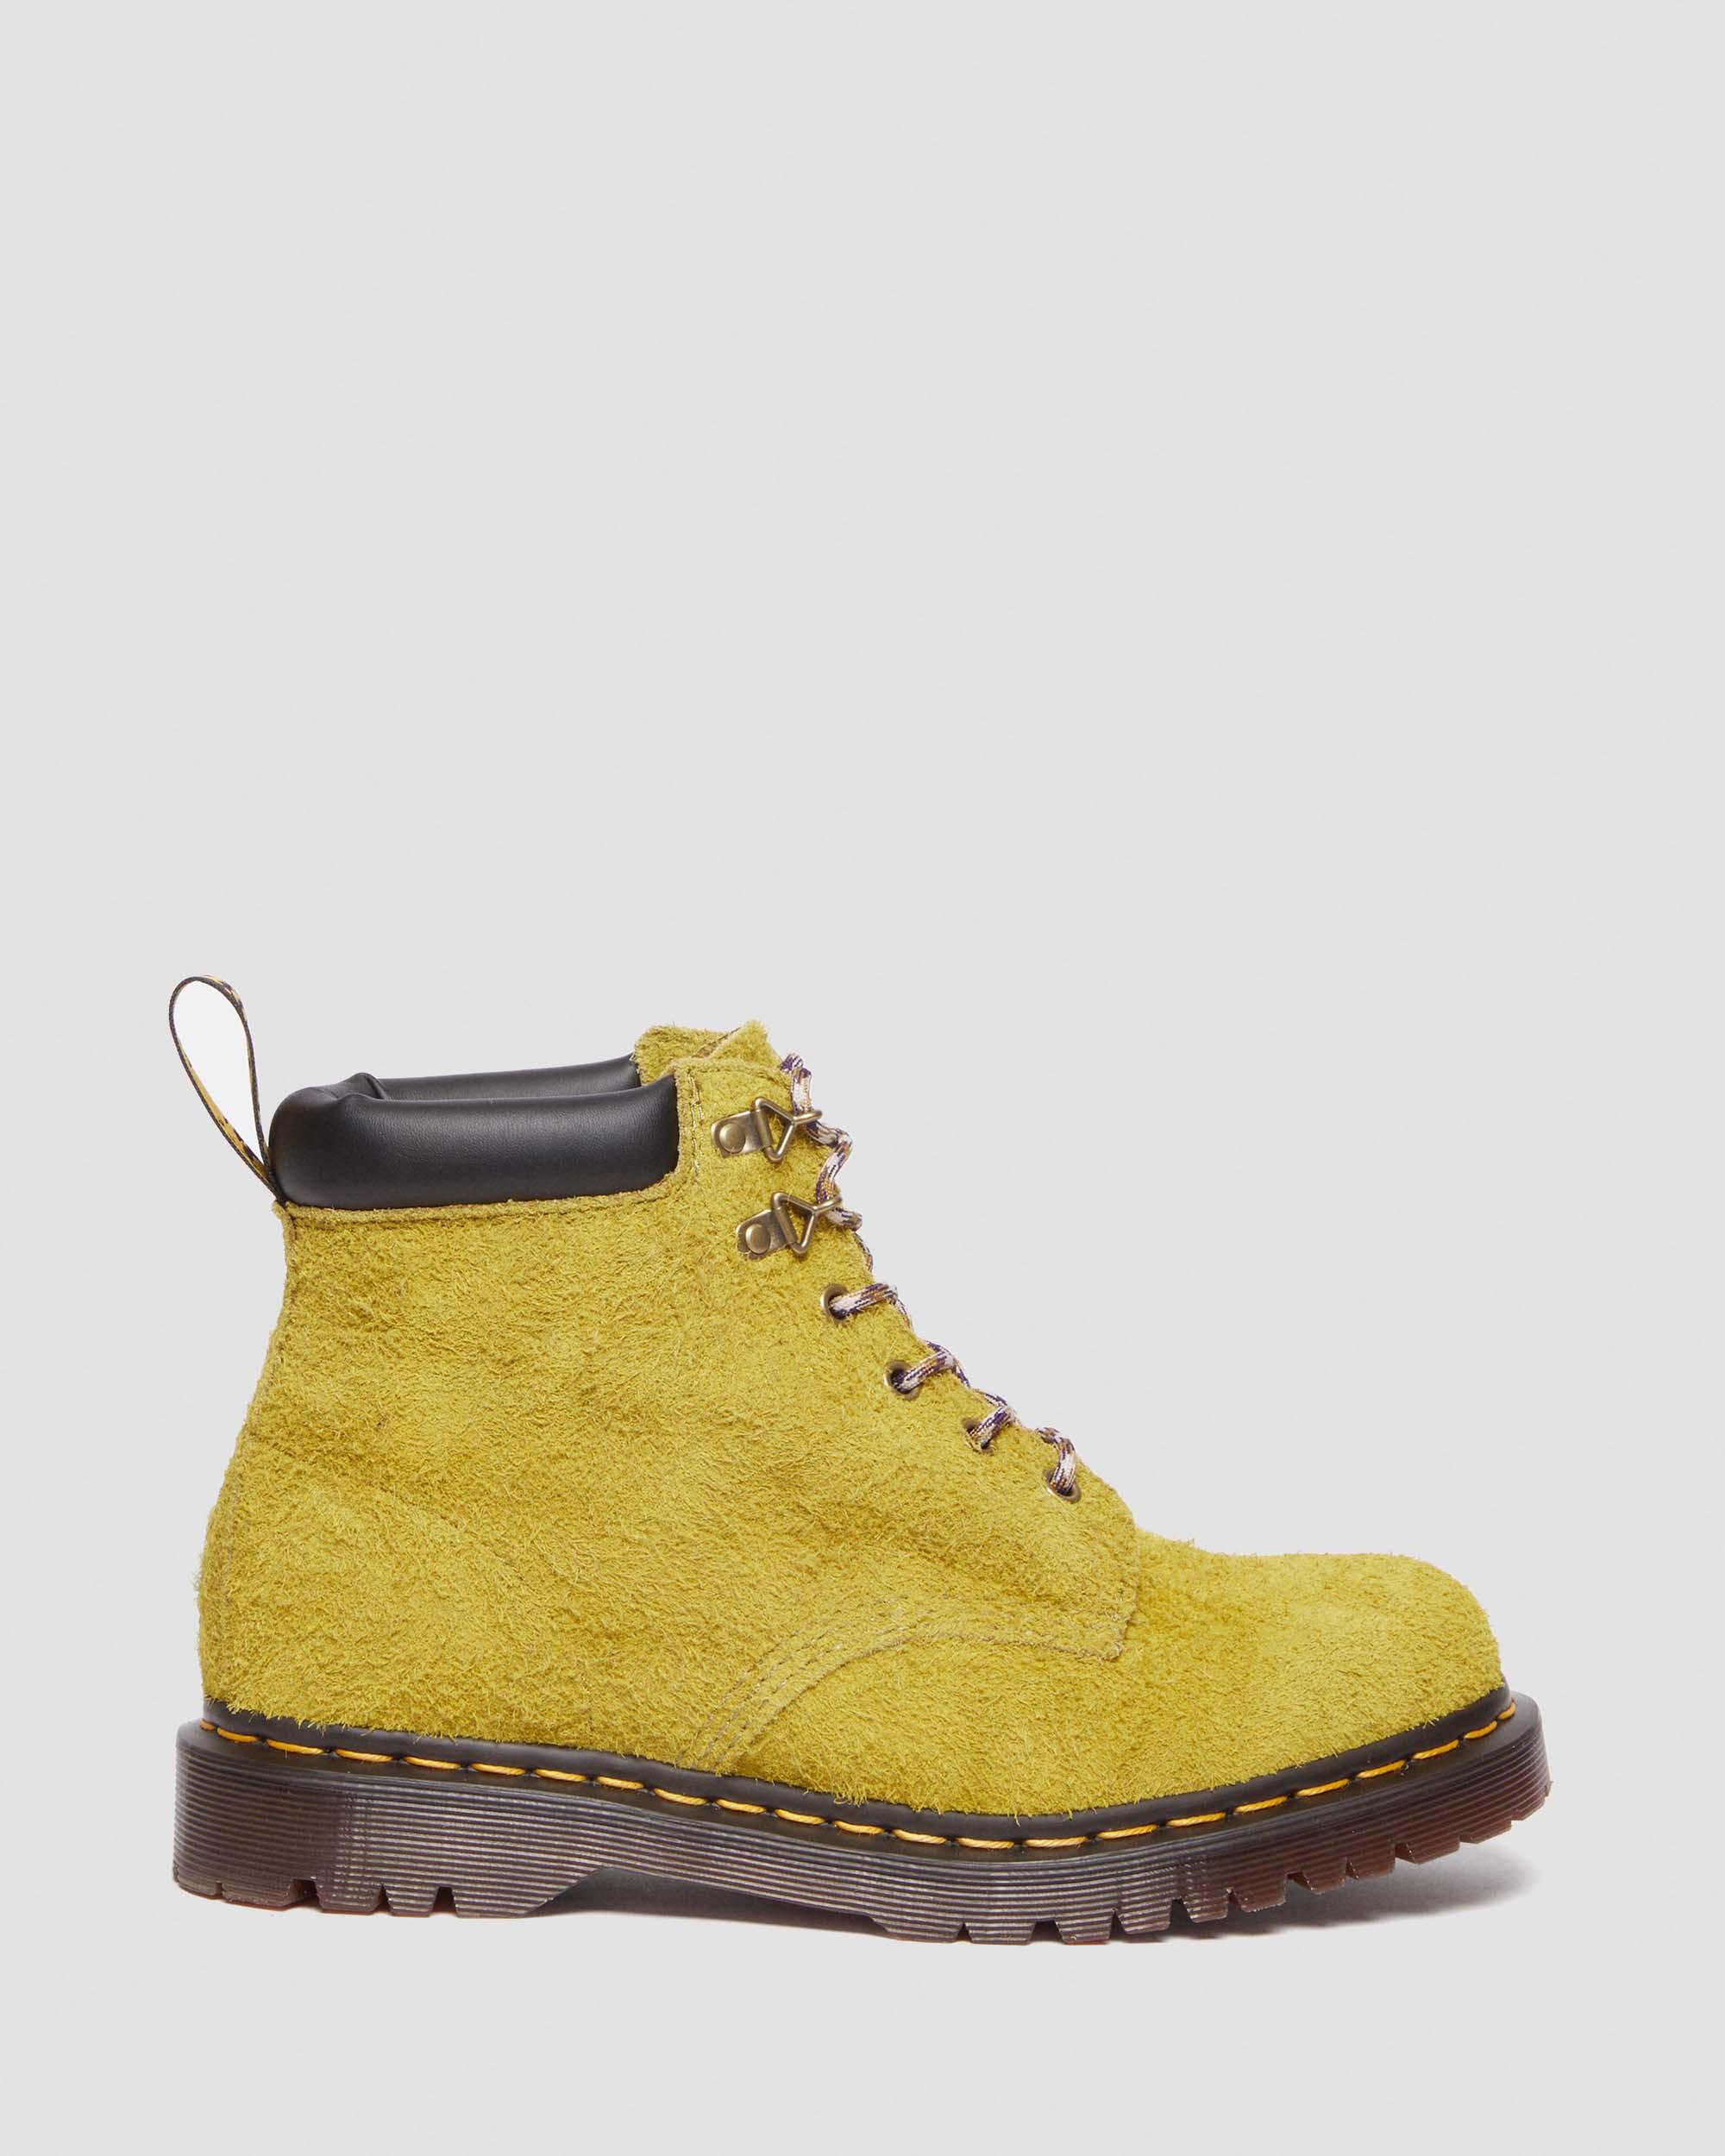 939 Ben Suede Padded Collar Lace Up Boots in Moss Green | Dr. Martens